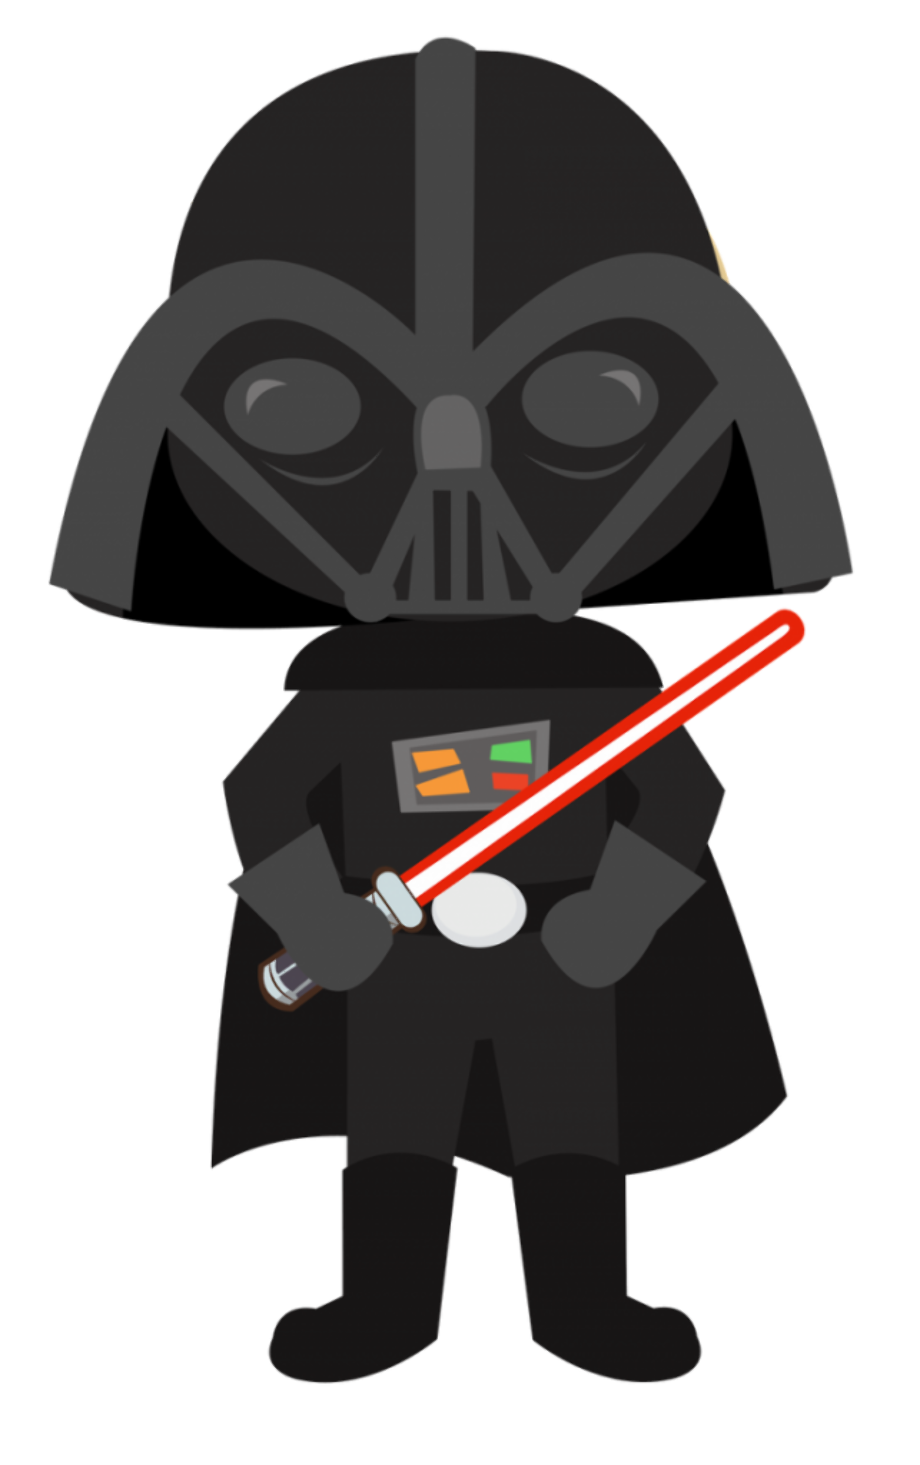 Download High Quality Star Wars Clipart Transparent Background